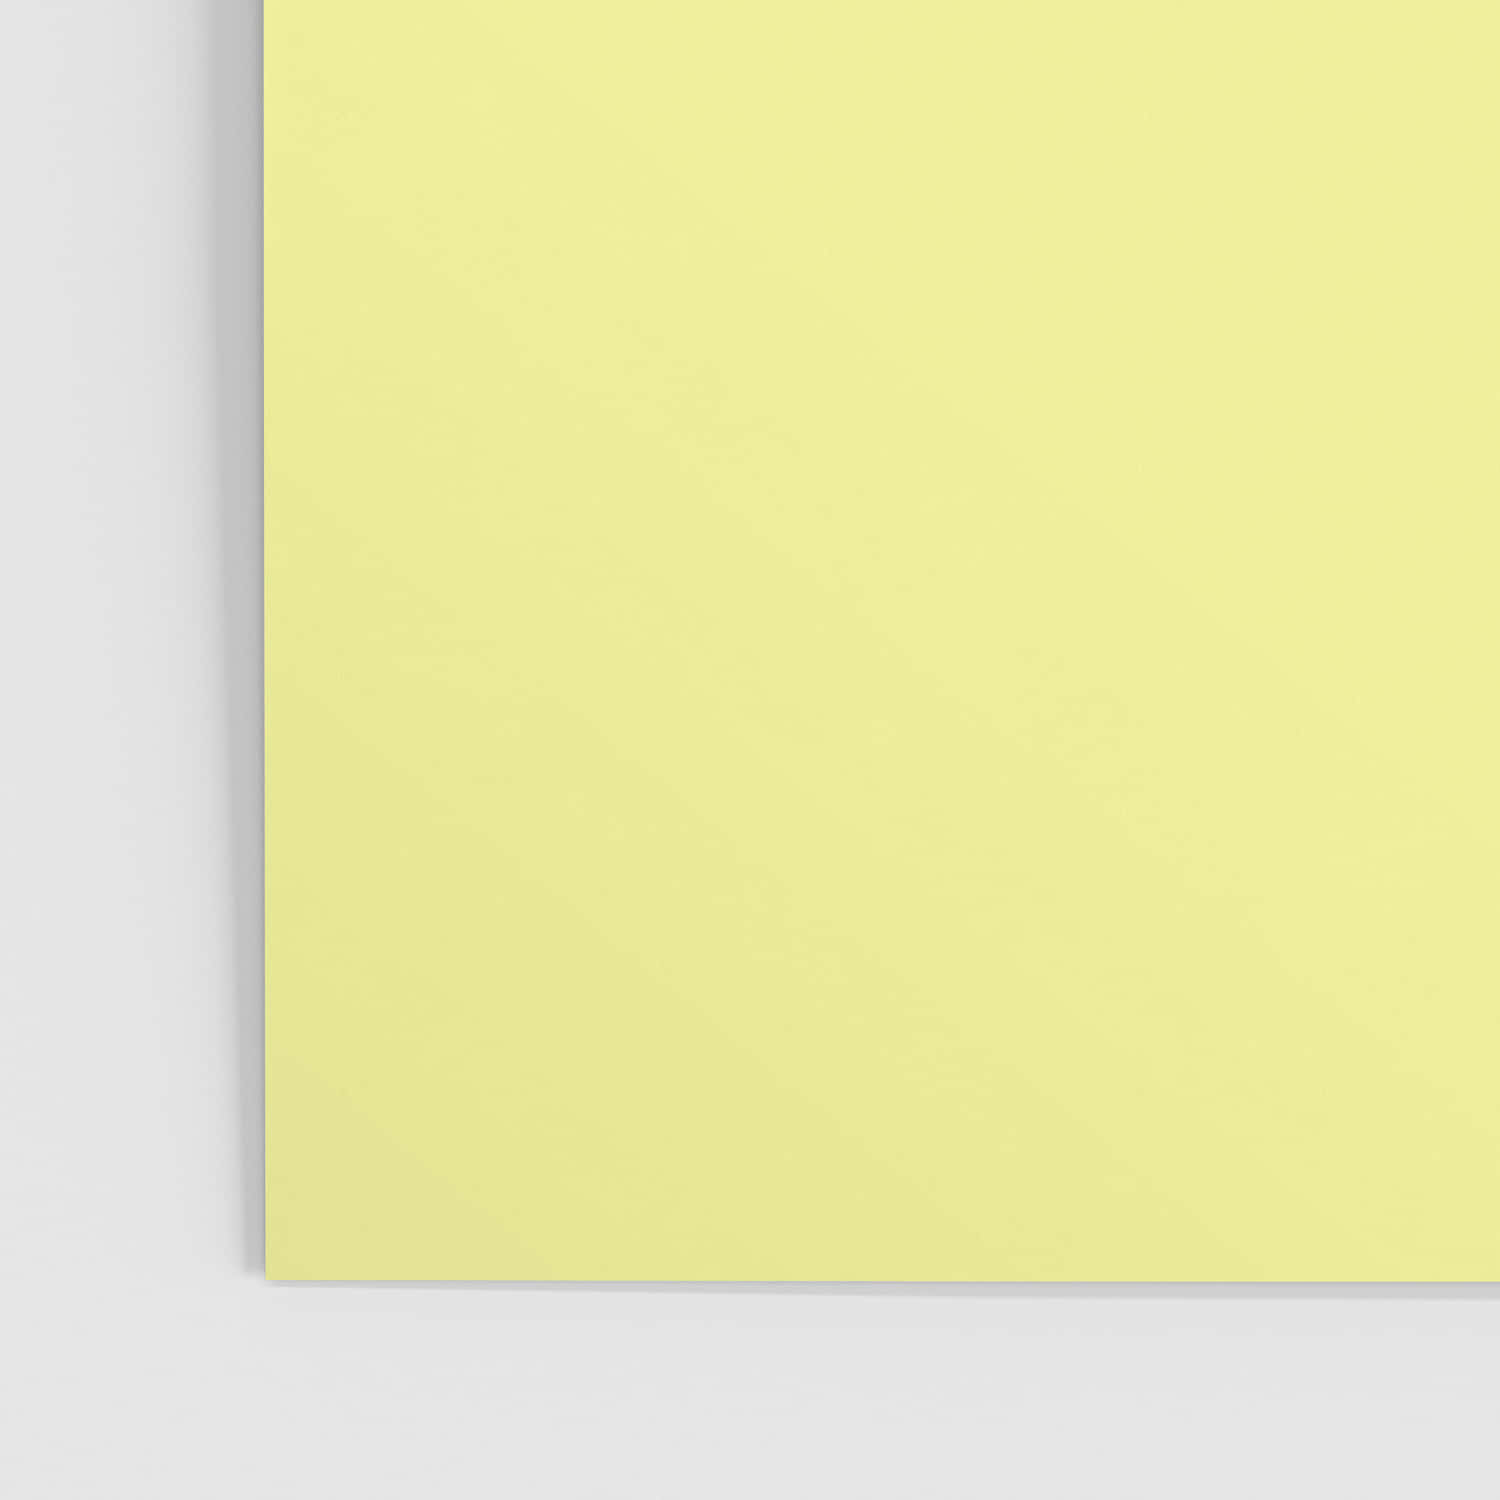 A Yellow Notepad On A White Background